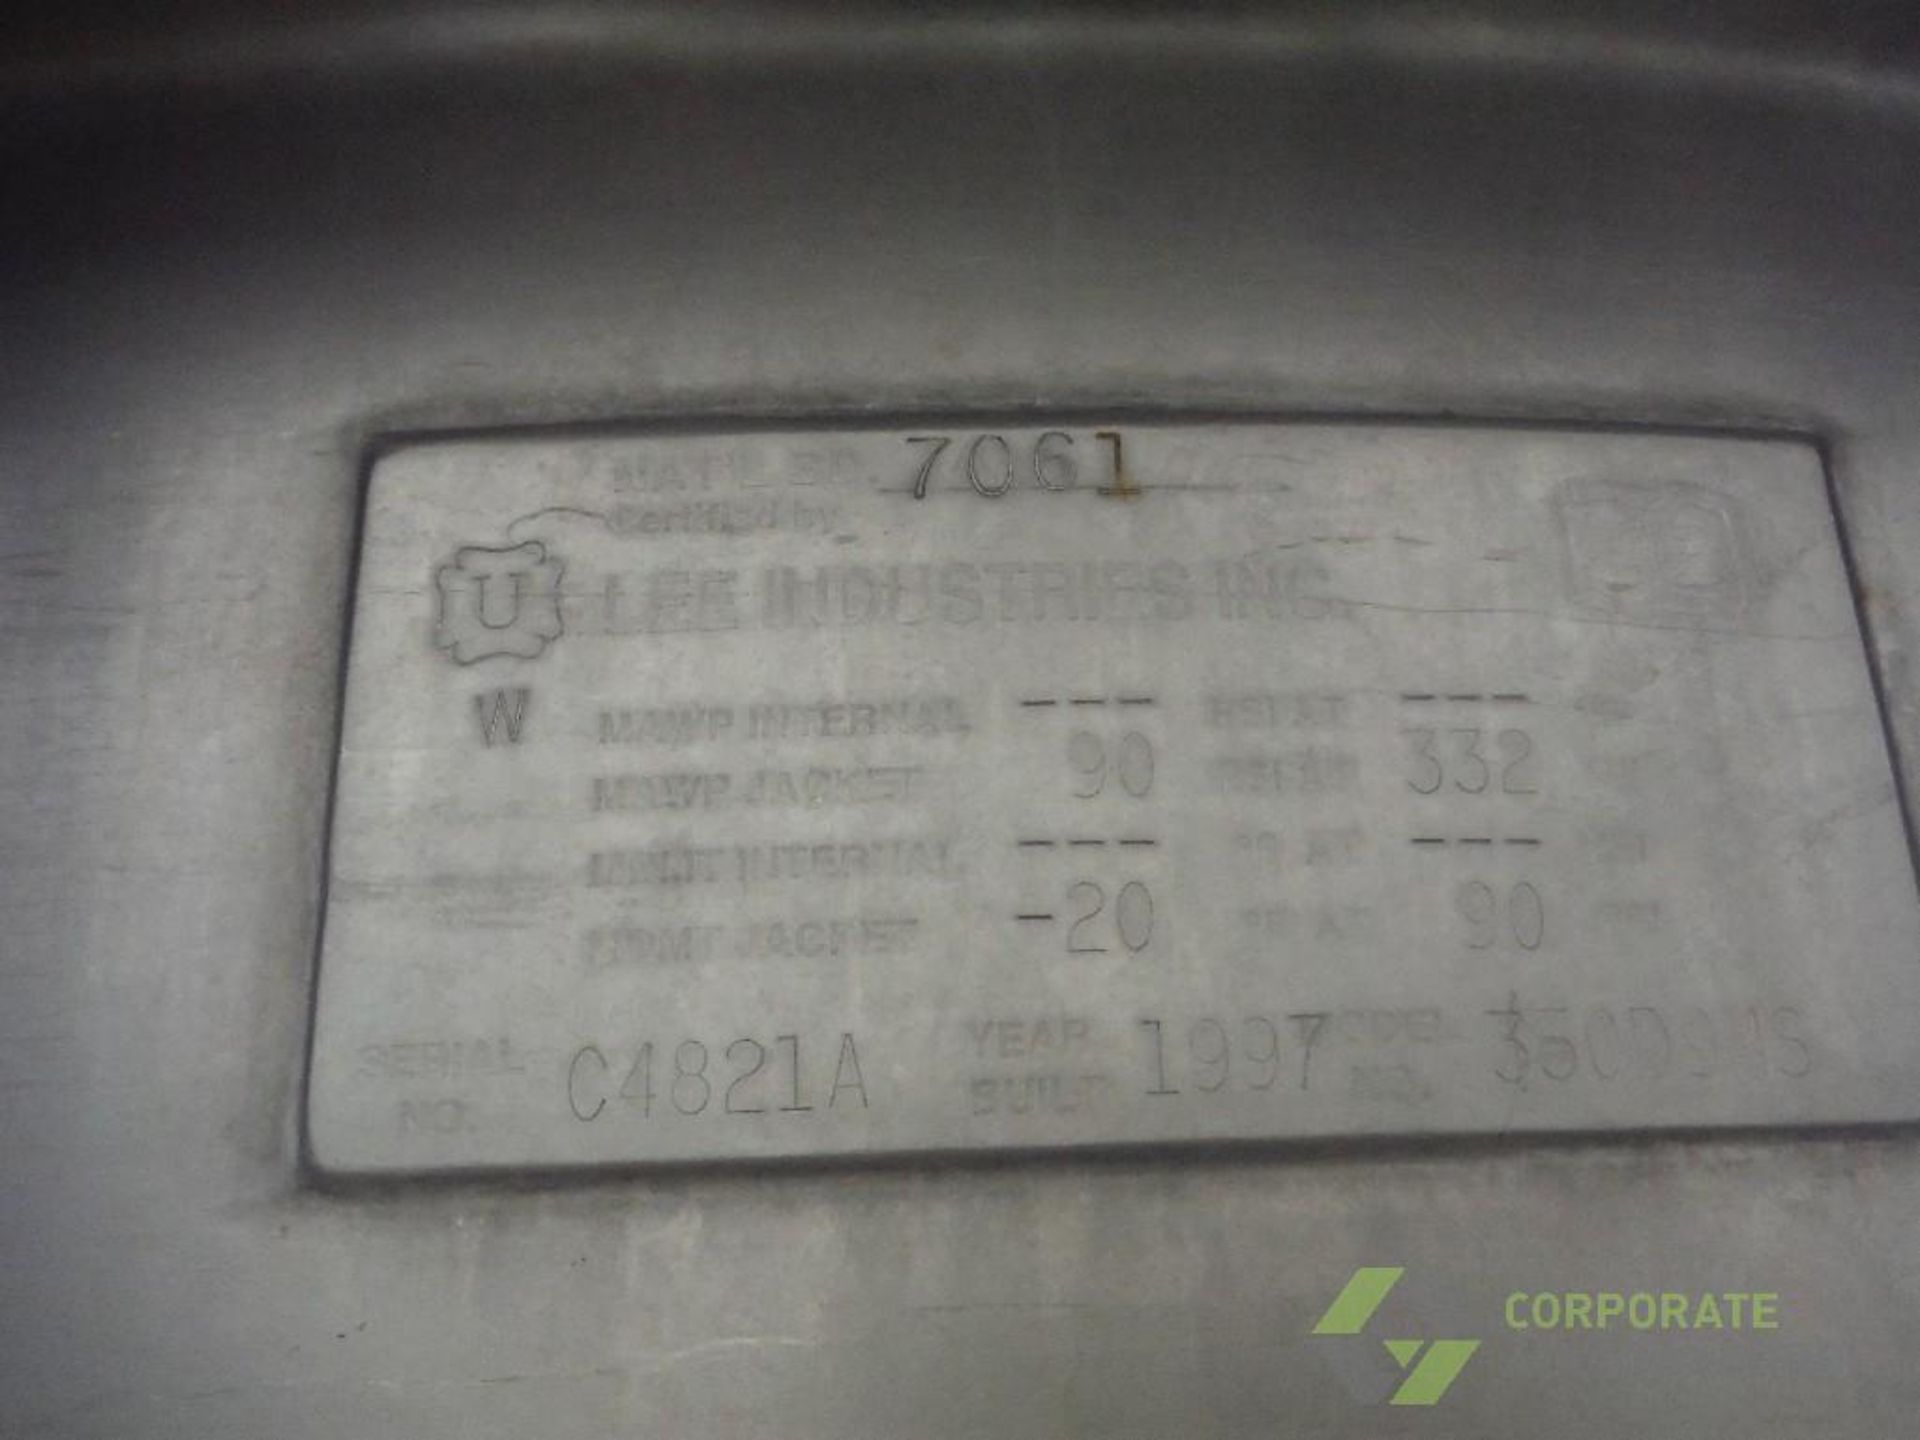 1997 Lee SS 350 gallon kettle, Model 350D9MS, SN C4821A, 1/2 jacket, 90 psi @ 332 F, top - Image 4 of 8